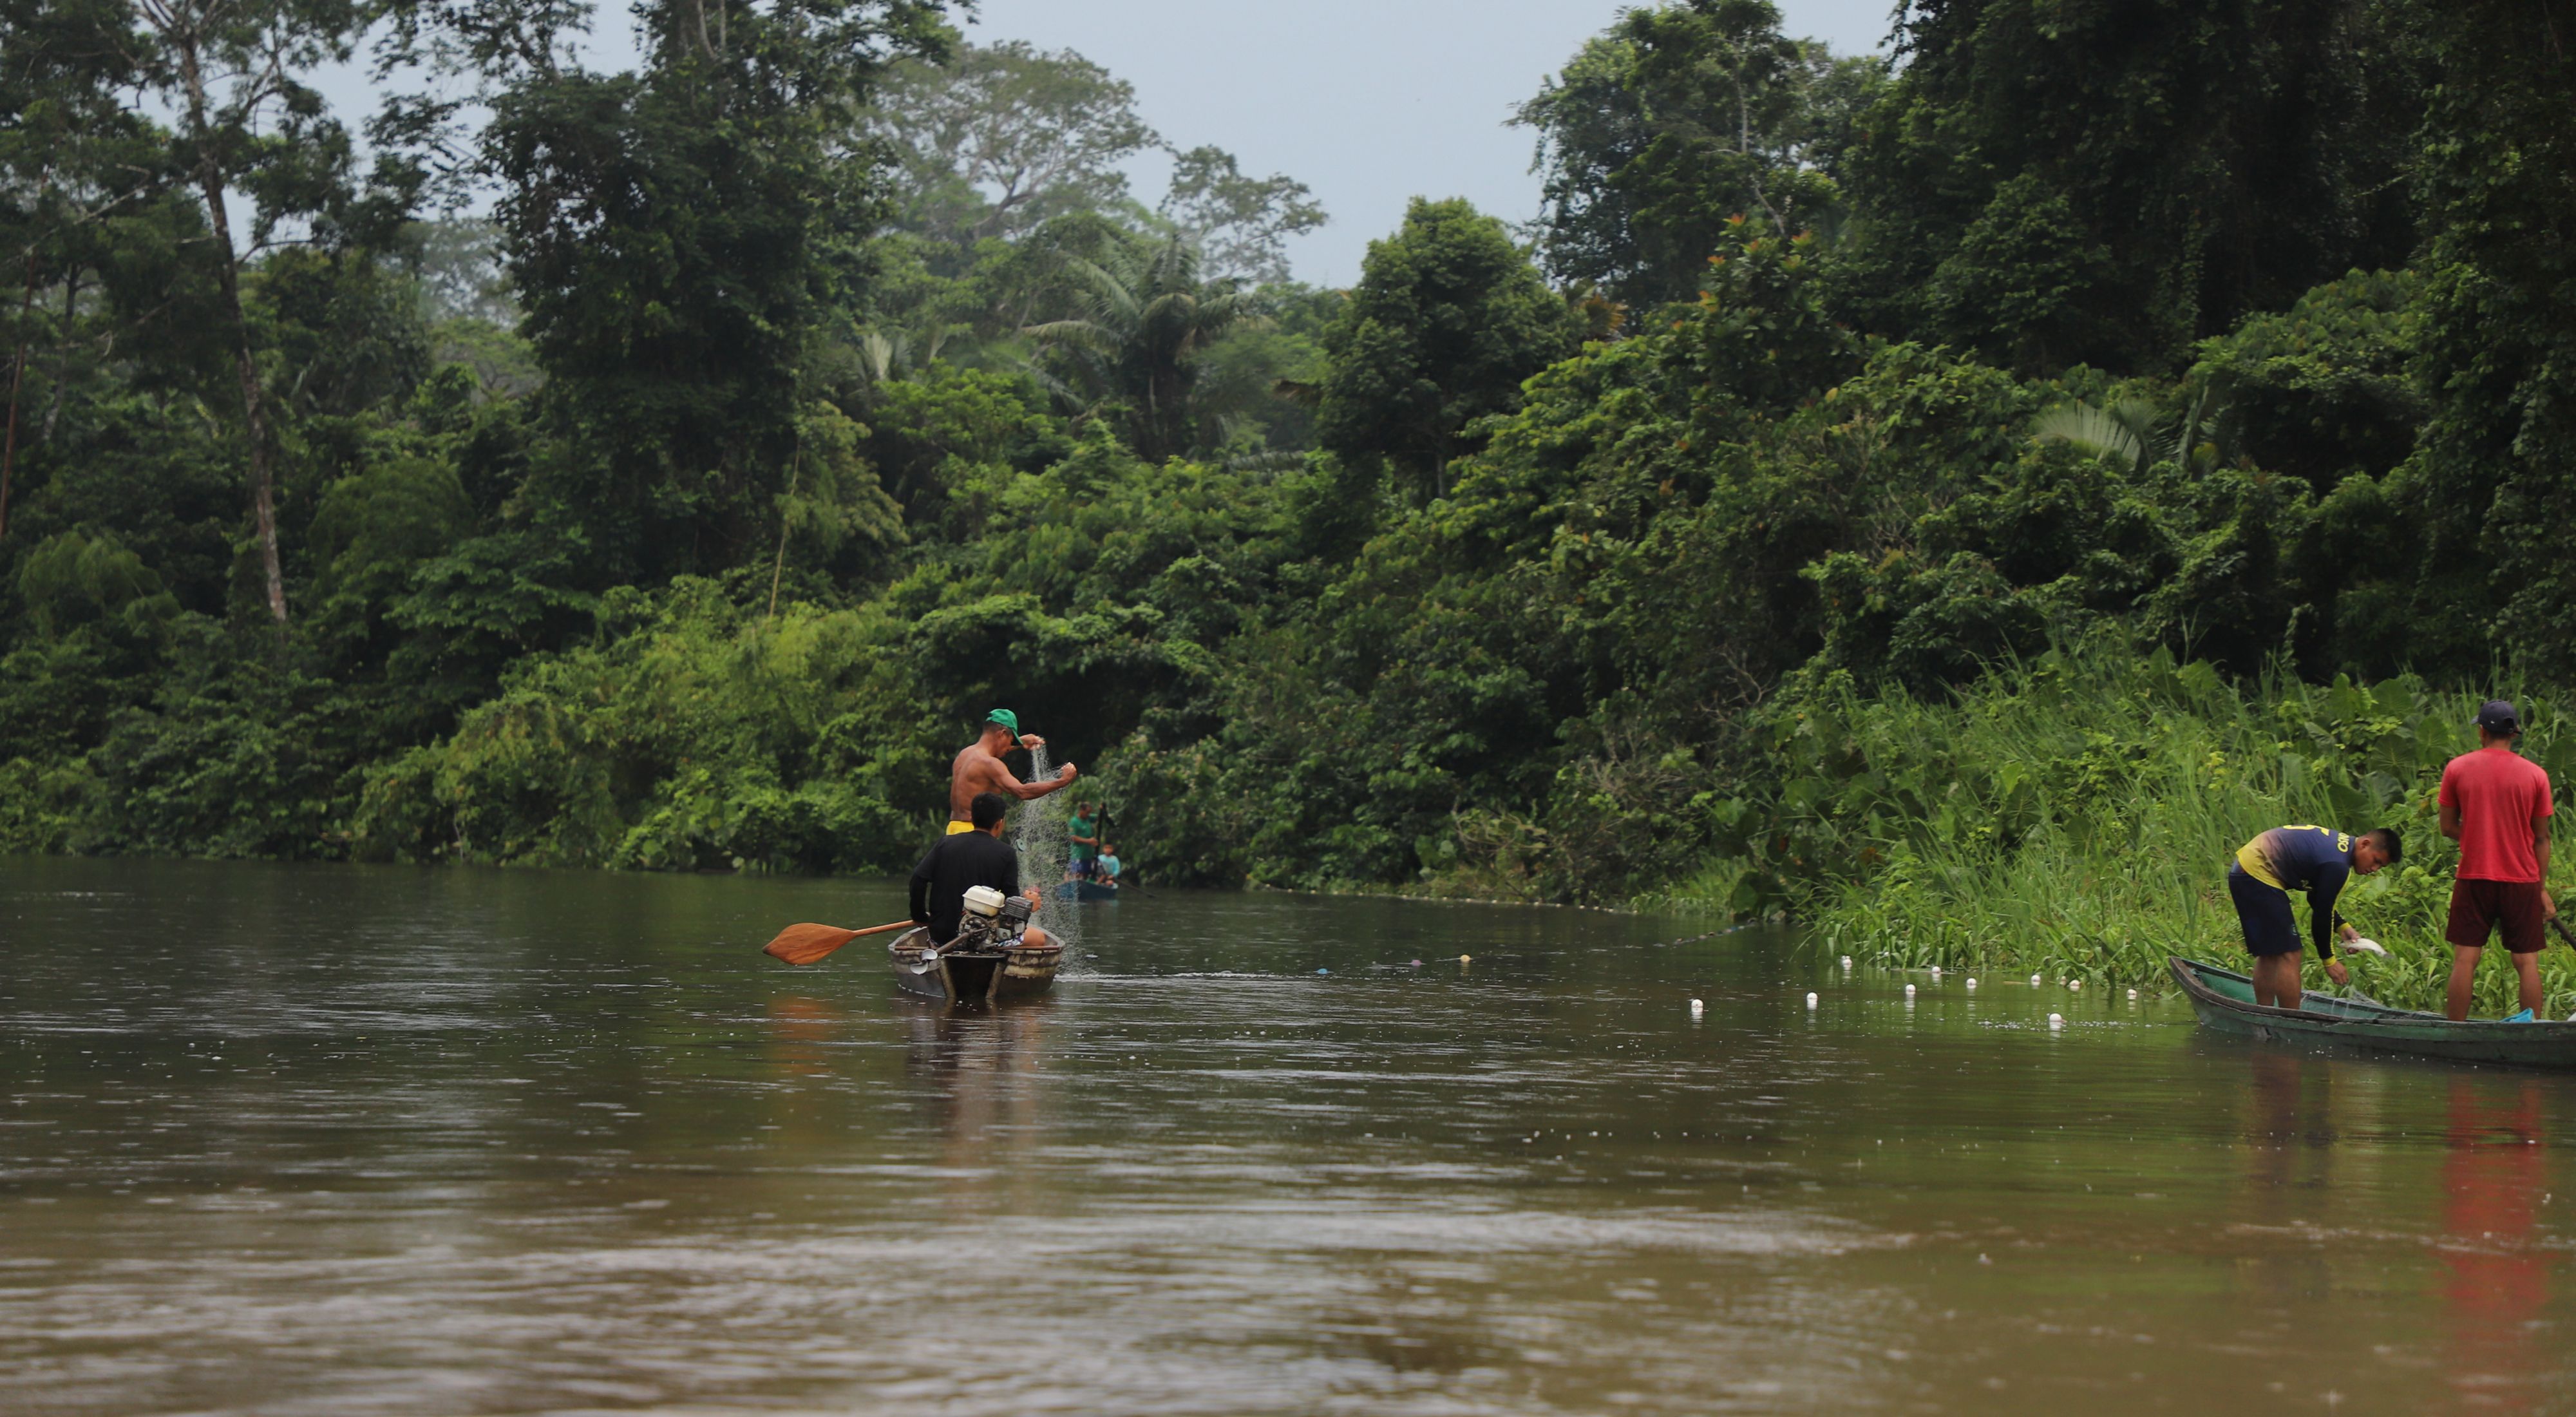 Several men stand in two boats on a river, holding fishing nets in front of a lush forest